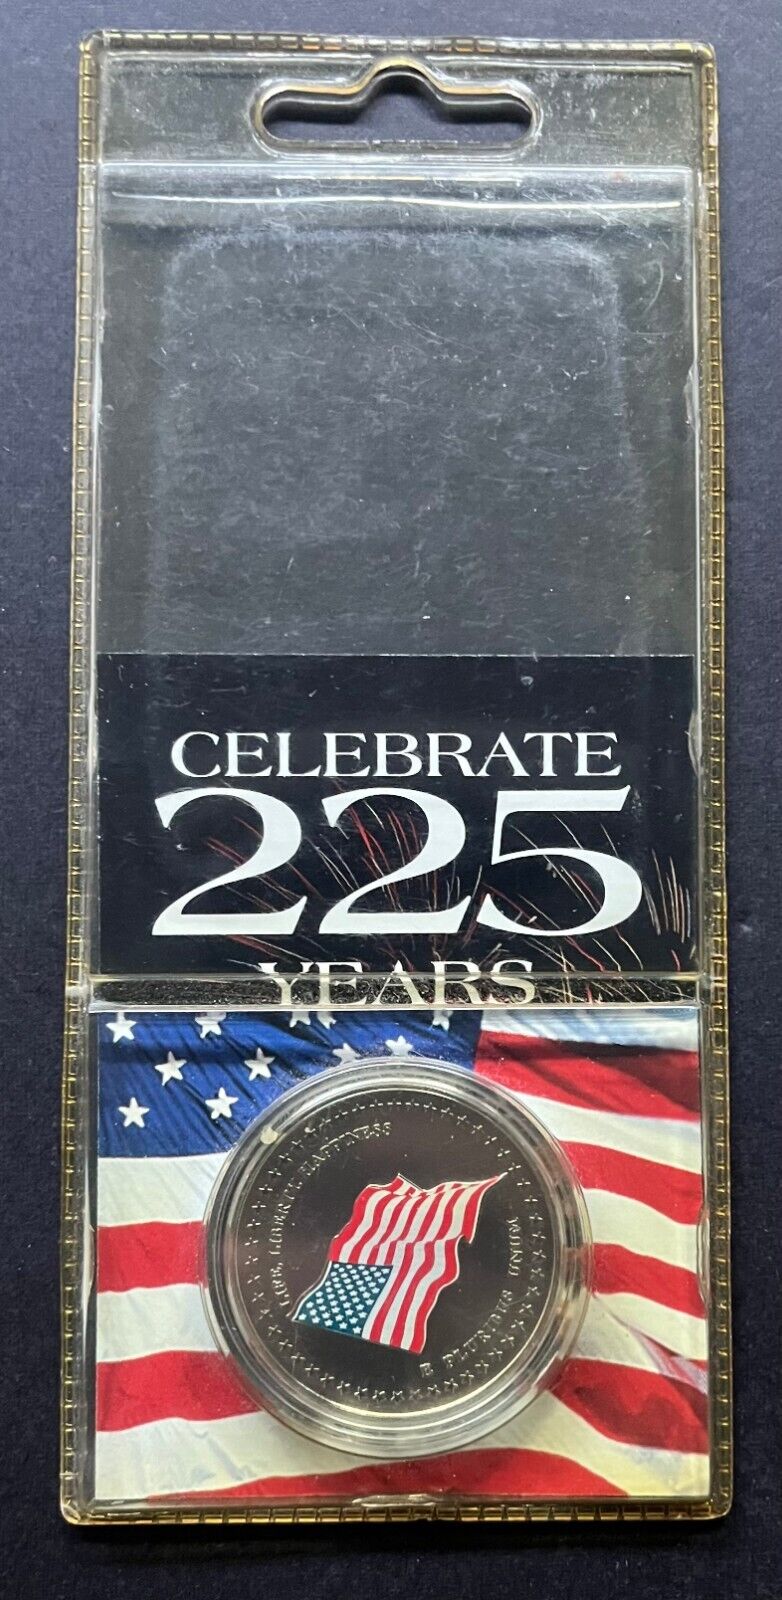 2001 USA 225 Years Commemorative Medallion Royal Canadian Mint Issued